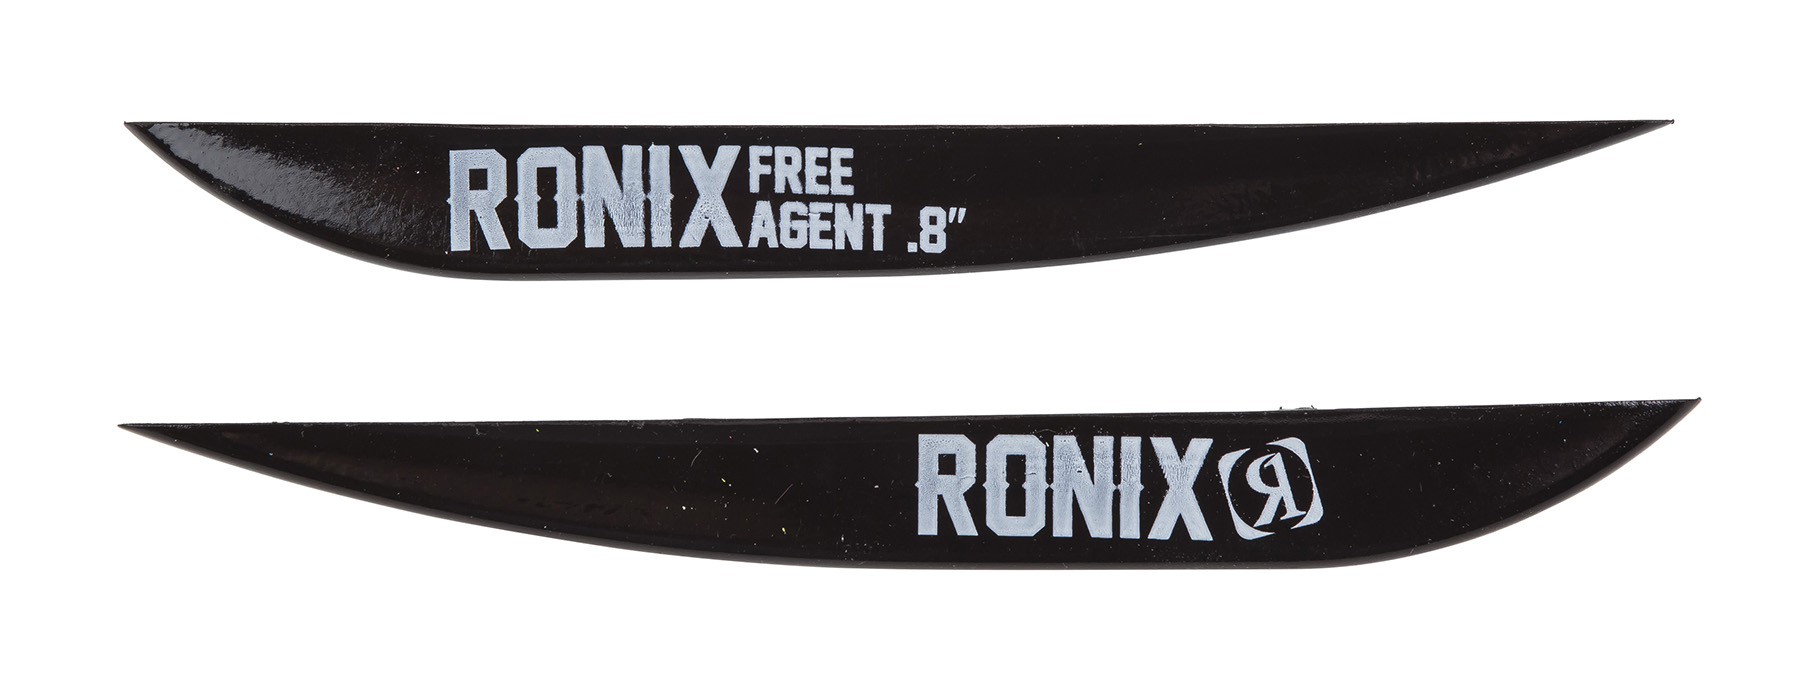   .8'' - FREE AGENT FIN - (2 PACK) - BLACK RONIX 2017